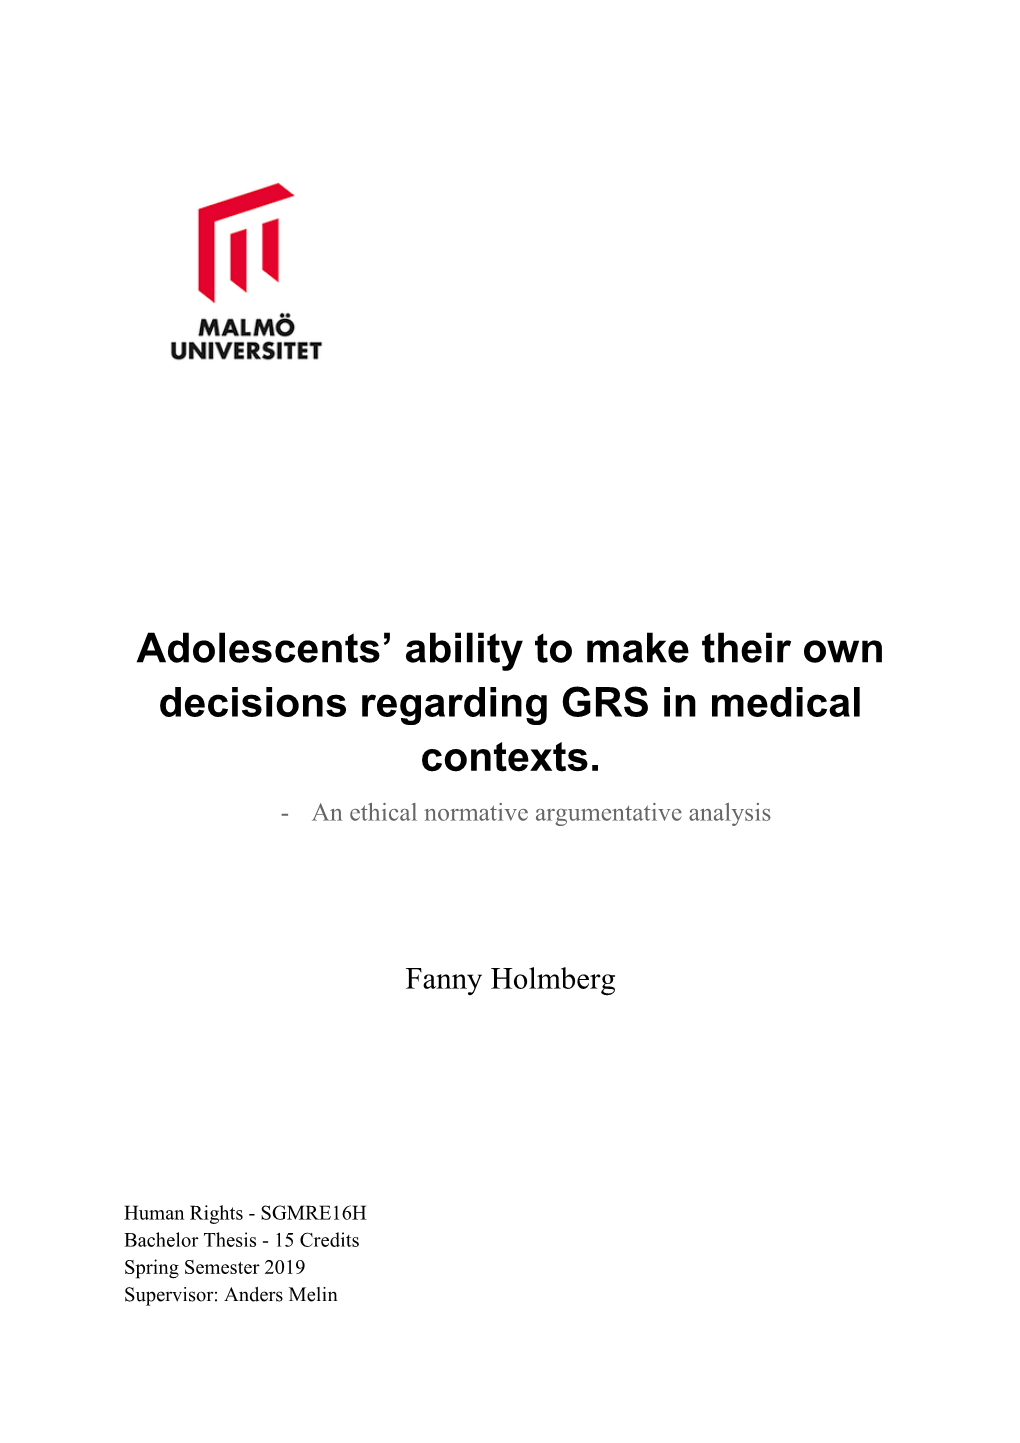 Adolescents' Ability to Make Their Own Decisions Regarding GRS In